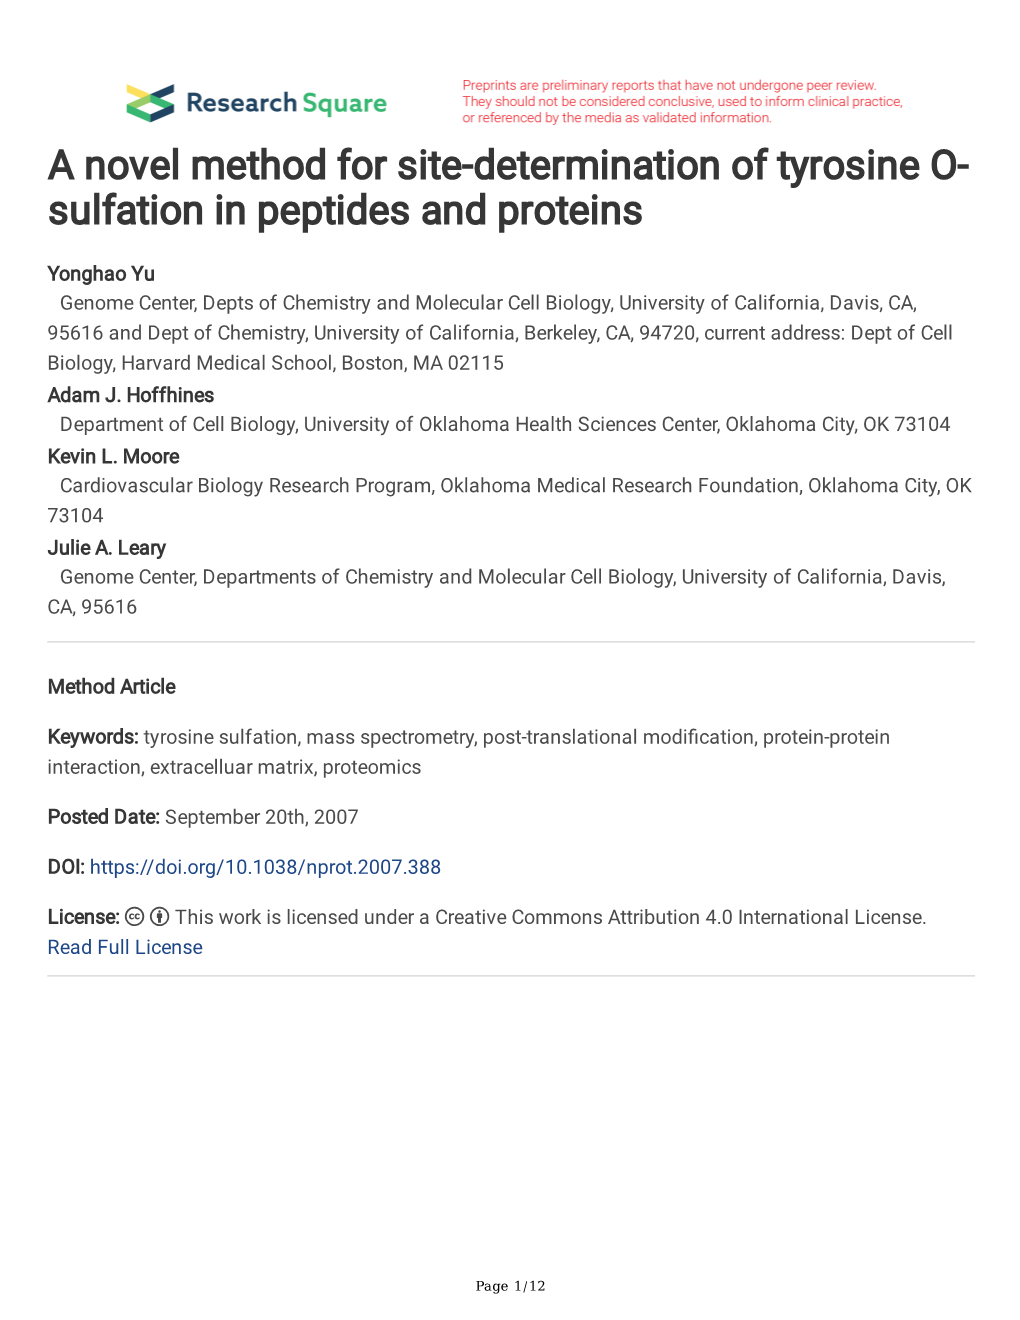 A Novel Method for Site-Determination of Tyrosine O- Sulfation in Peptides and Proteins